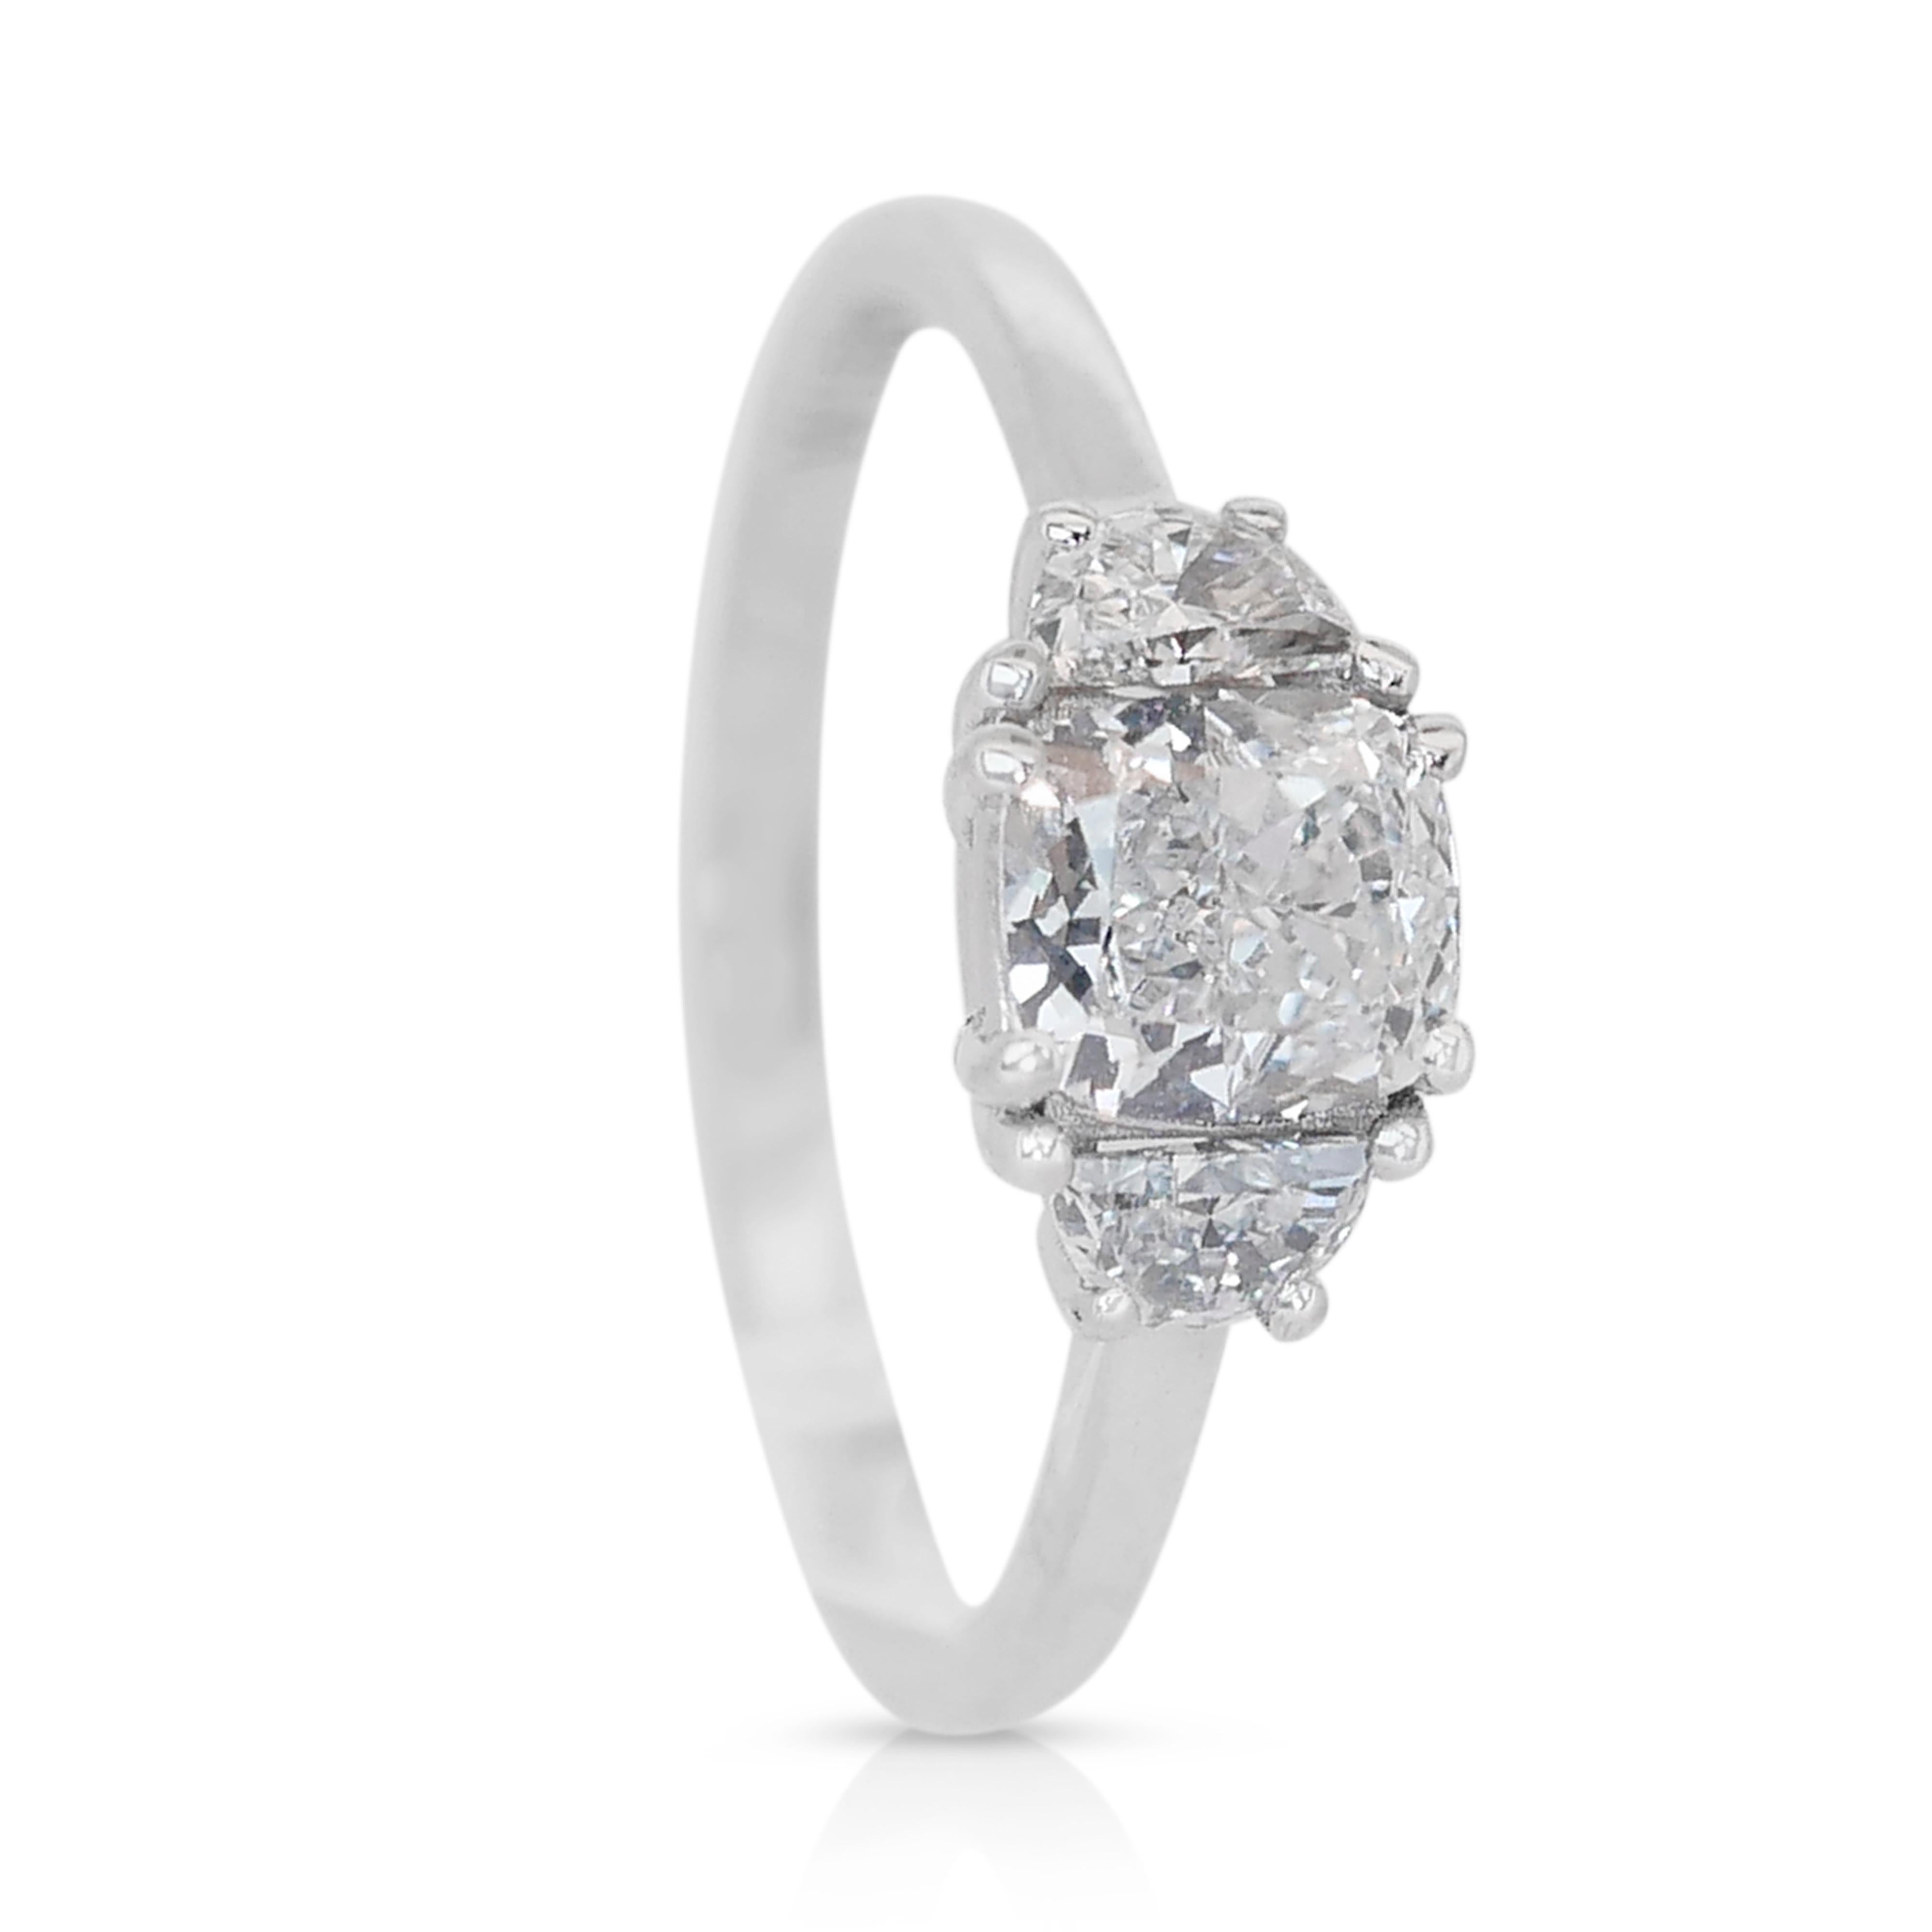 Glamorous 18K White Gold Natural Diamond Ring with 1.25 ct - GIA & AIG Certified For Sale 3